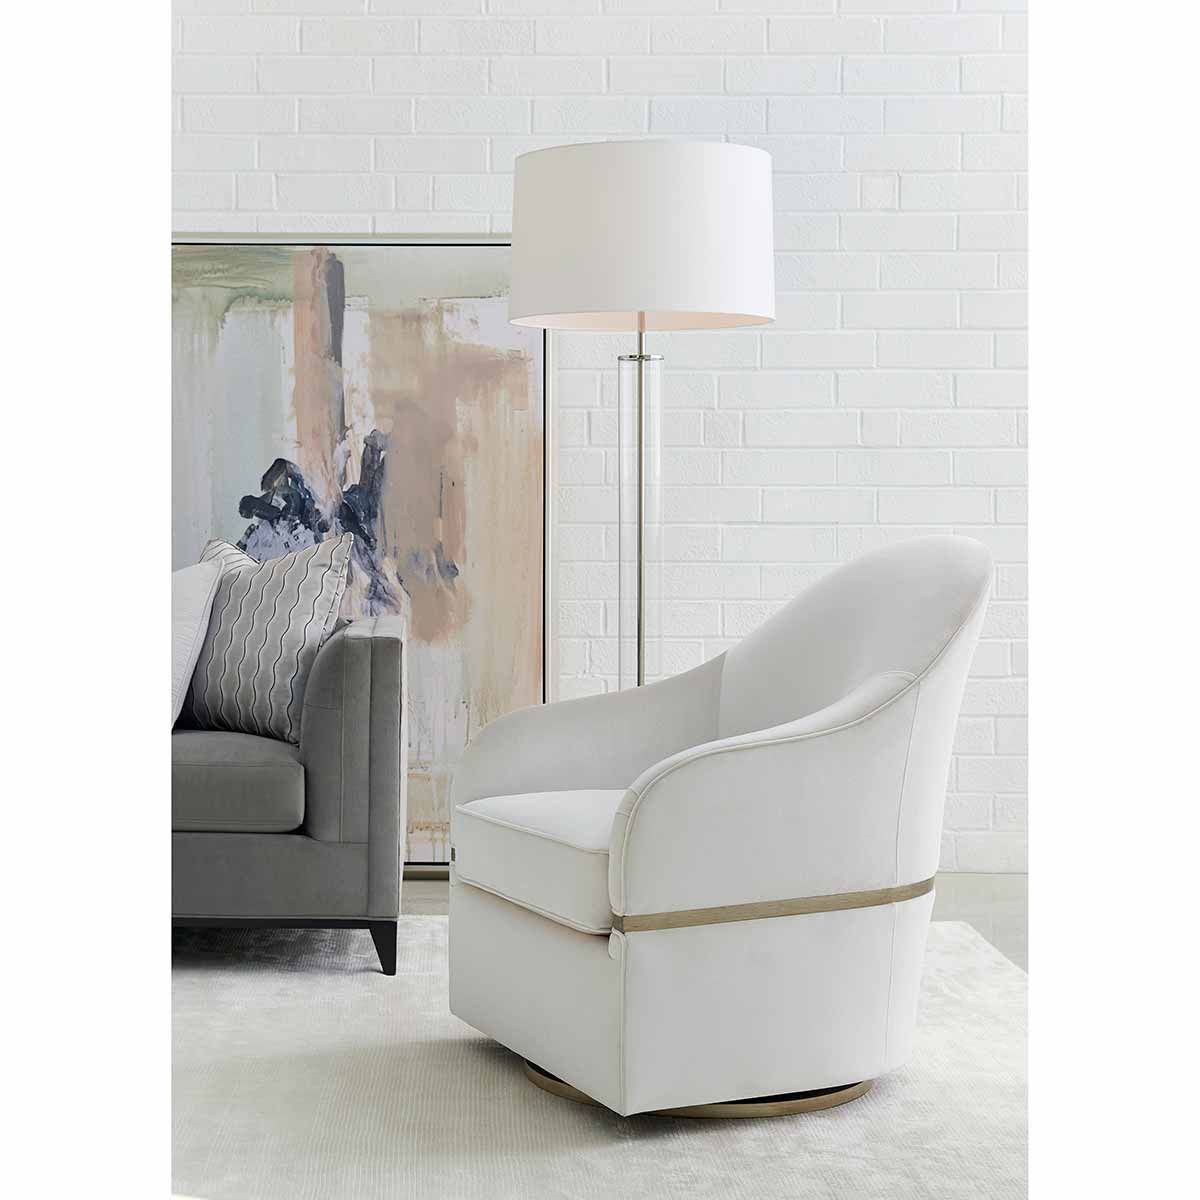 Place Direct | Contemporary Seating With Swivel Motion Or Casters Throughout Twirl Swivel Accent Chairs (View 20 of 20)